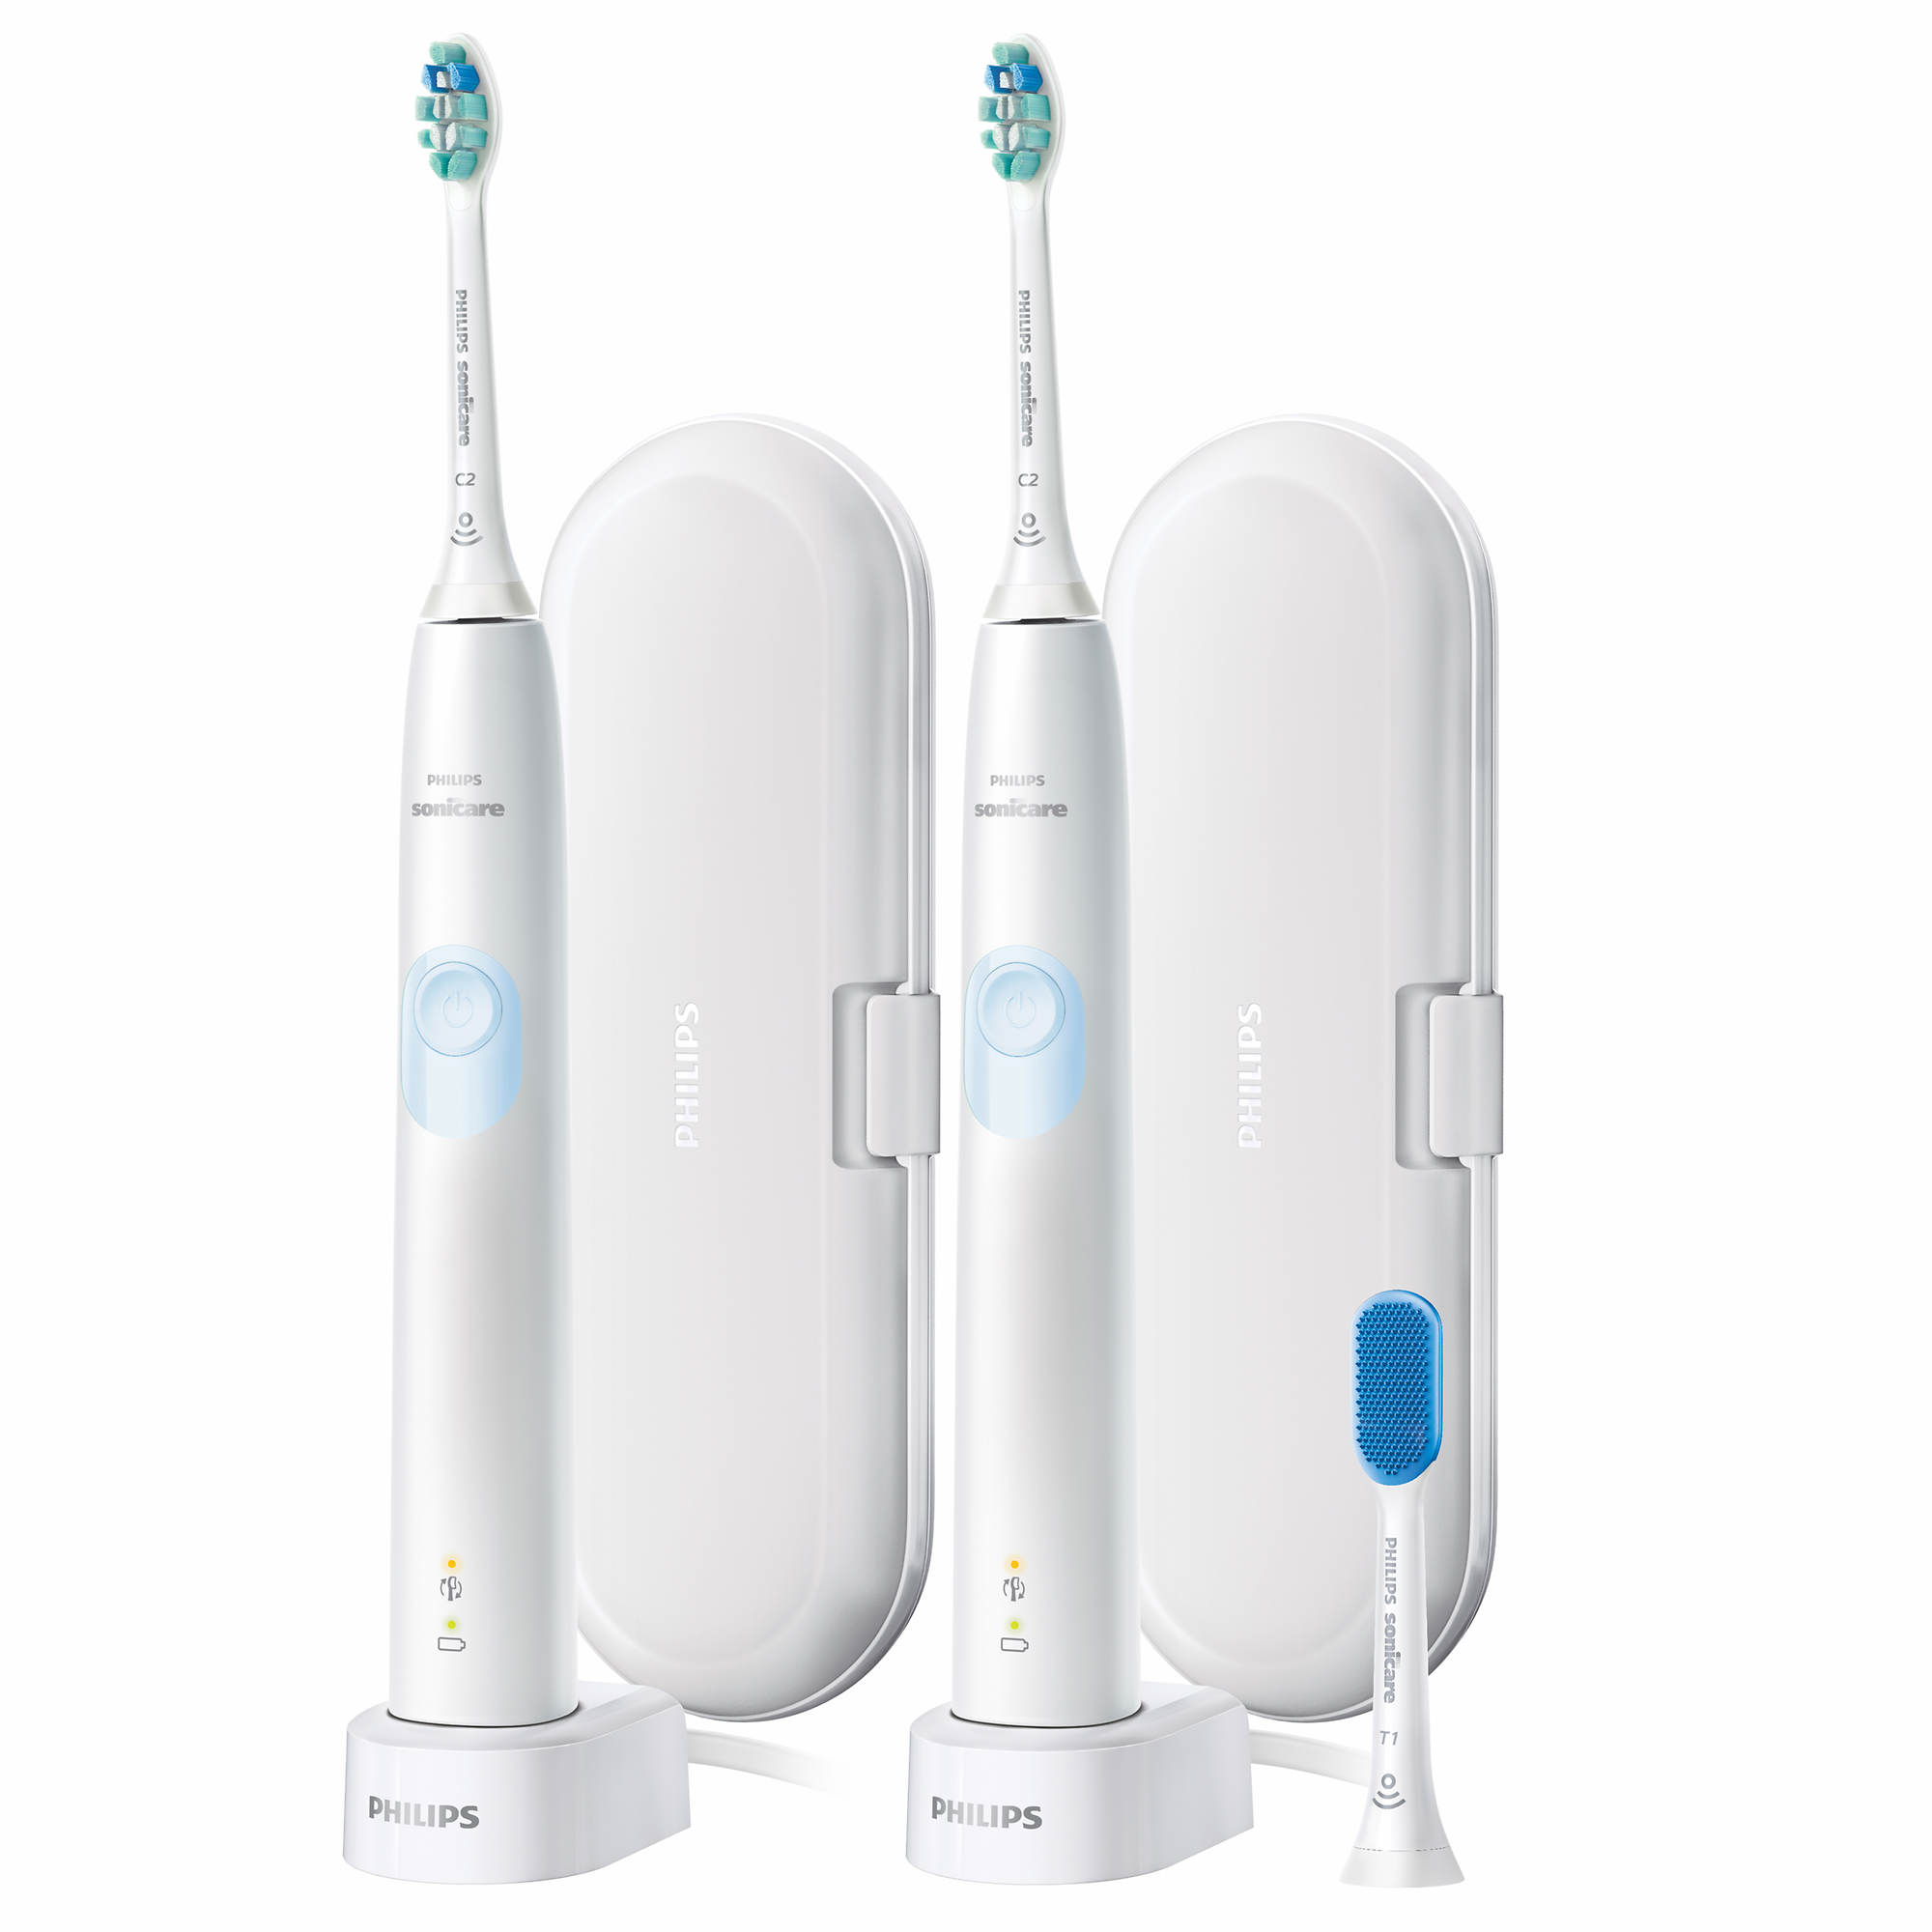 Philips Sonicare Protective Clean 4300 Plaque Control Rechargeable Toothbrush, 2 pk ...2000 x 2000